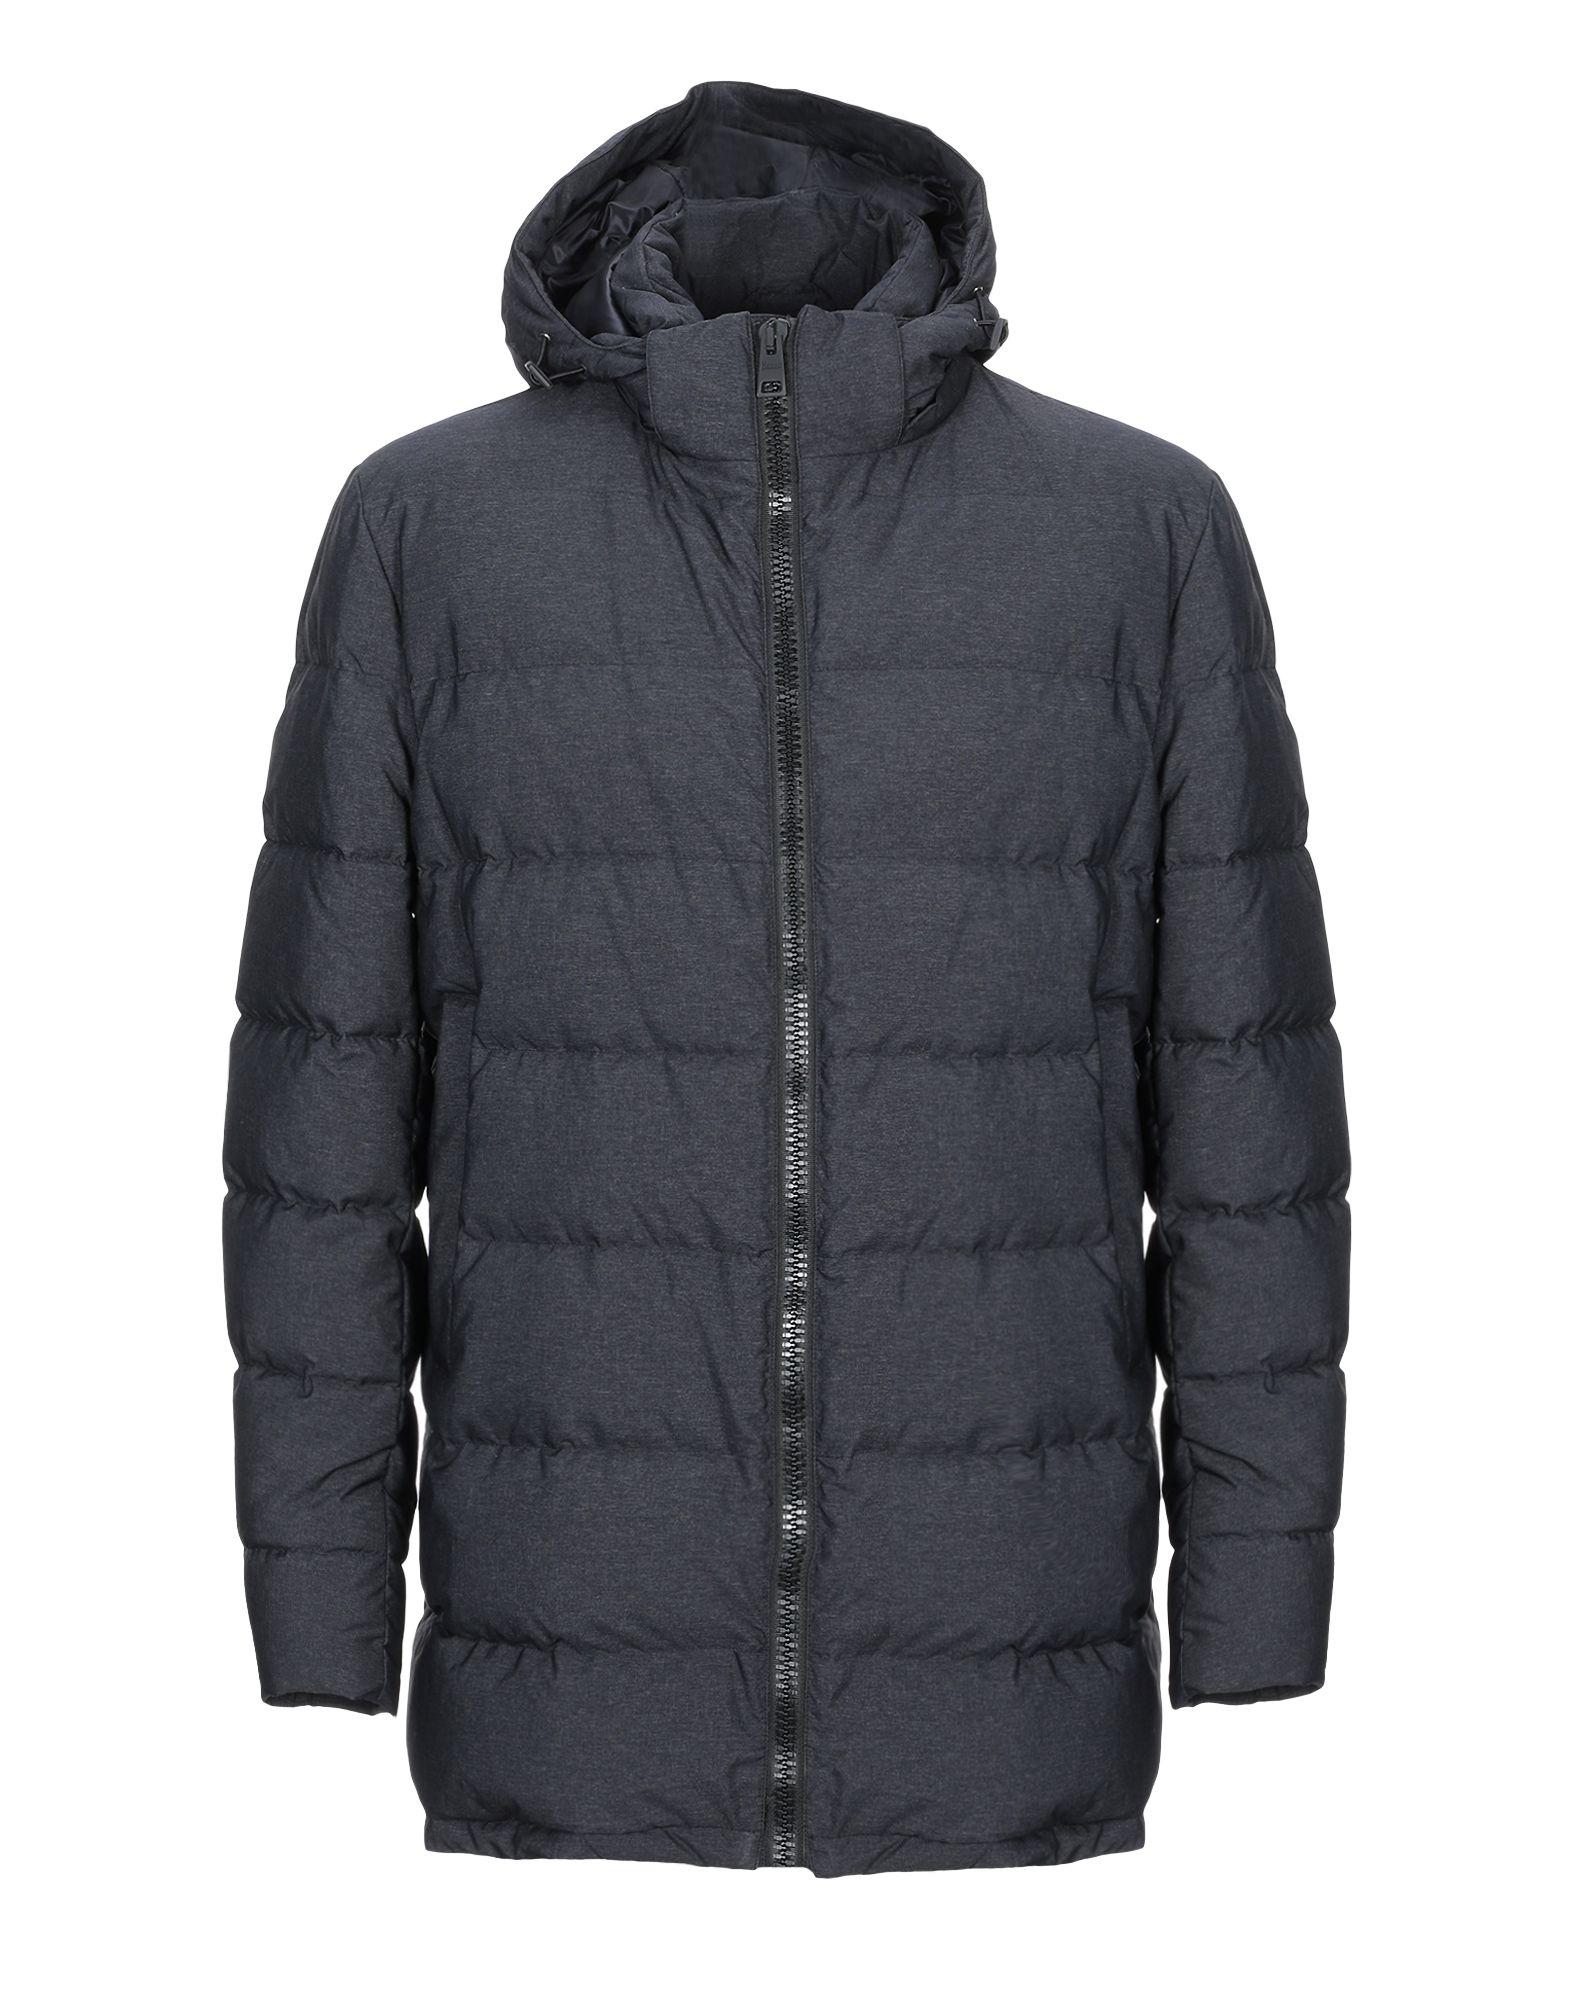 Herno Down Jacket in Gray for Men - Lyst